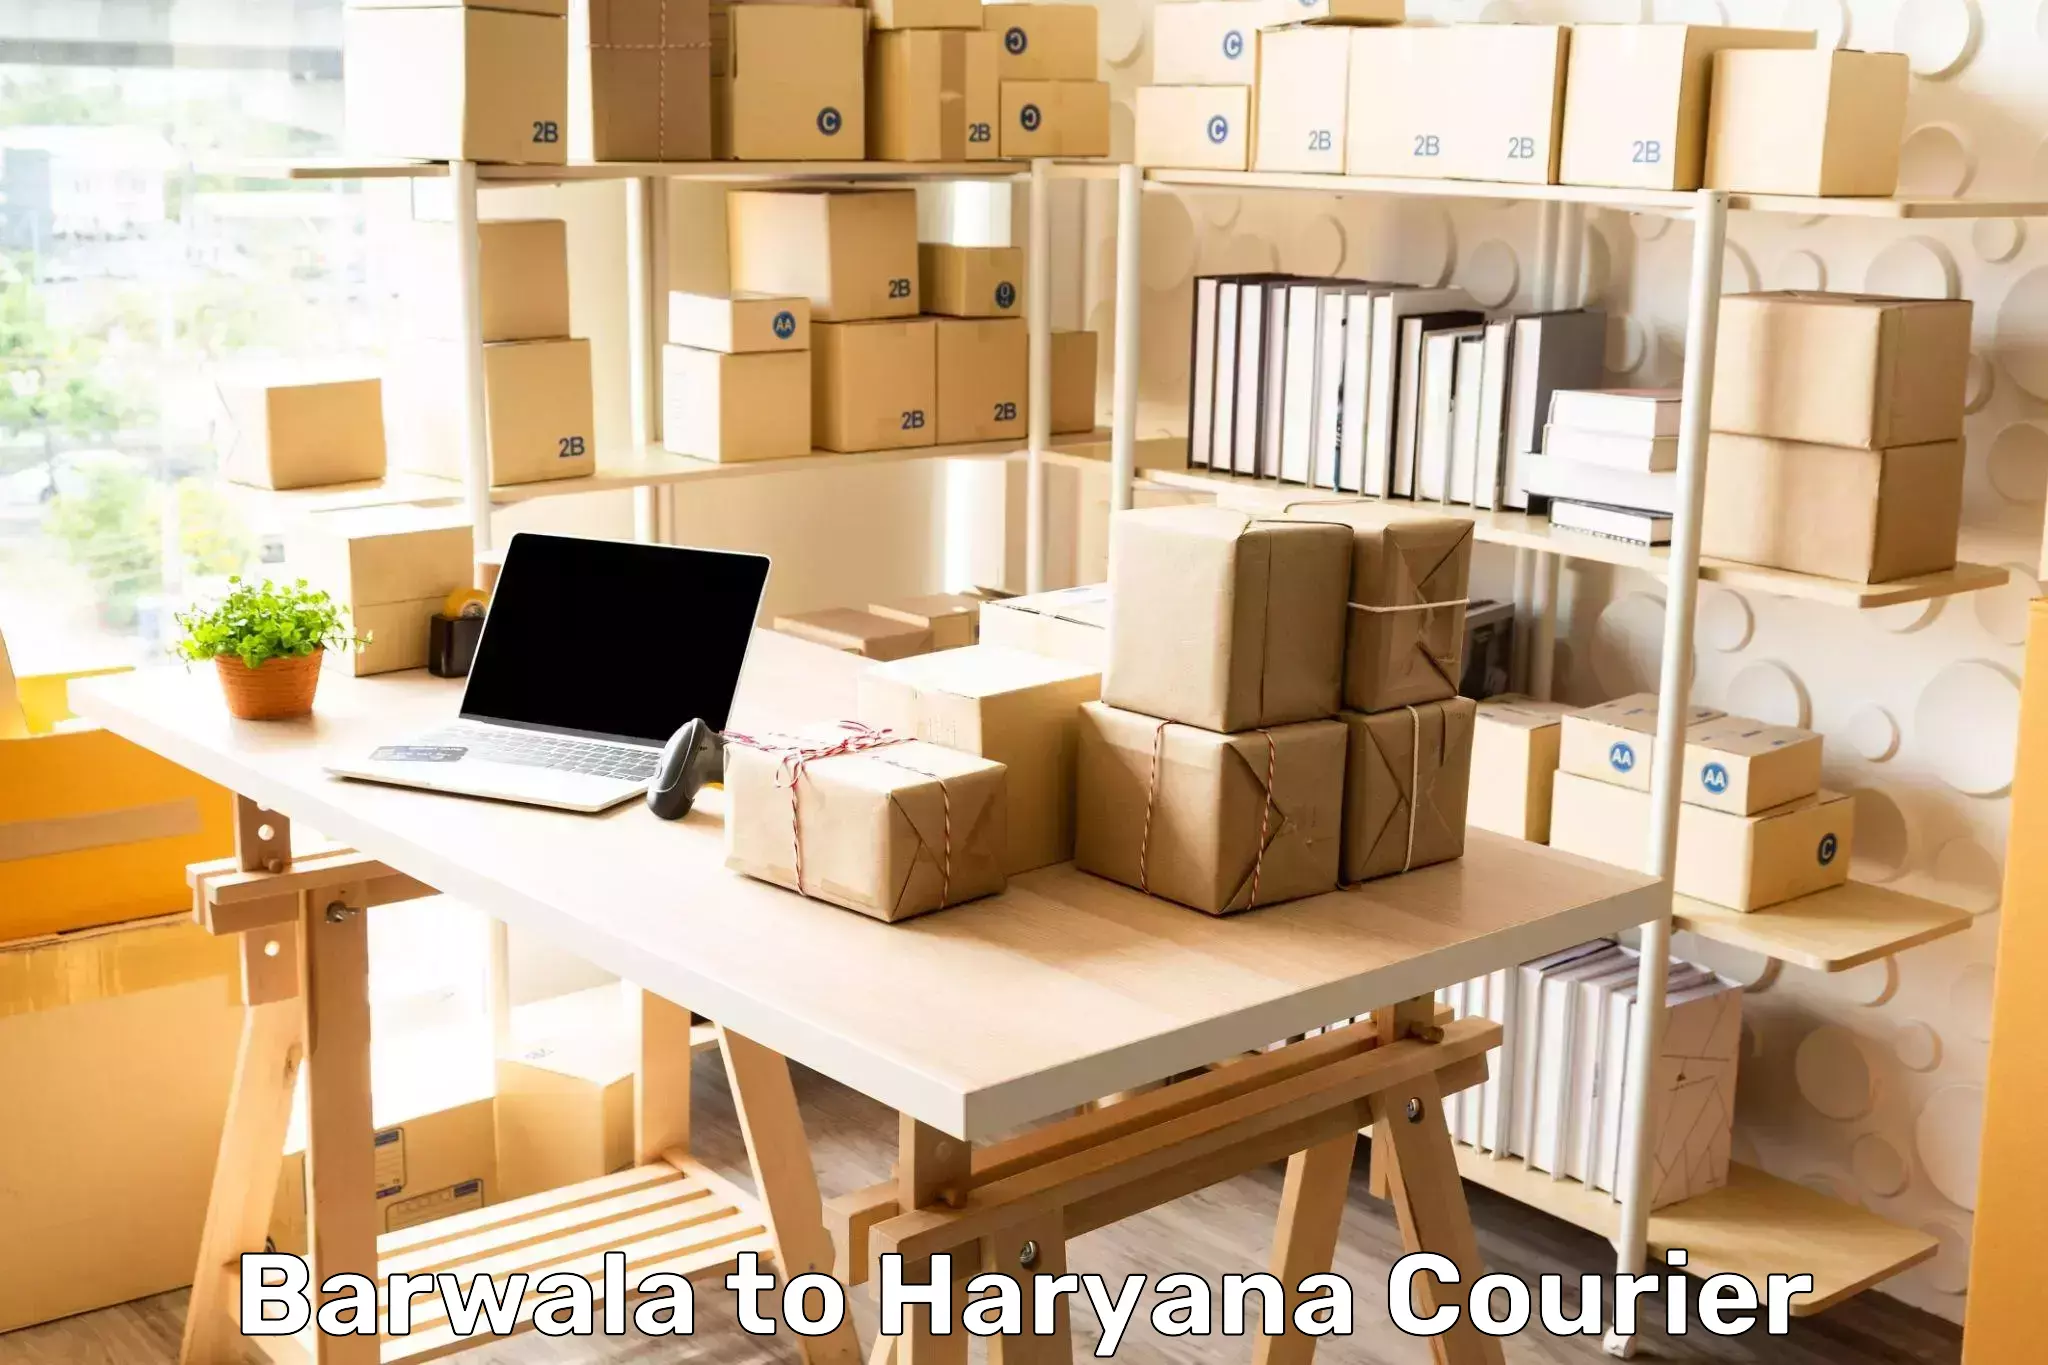 State-of-the-art courier technology Barwala to Barwala